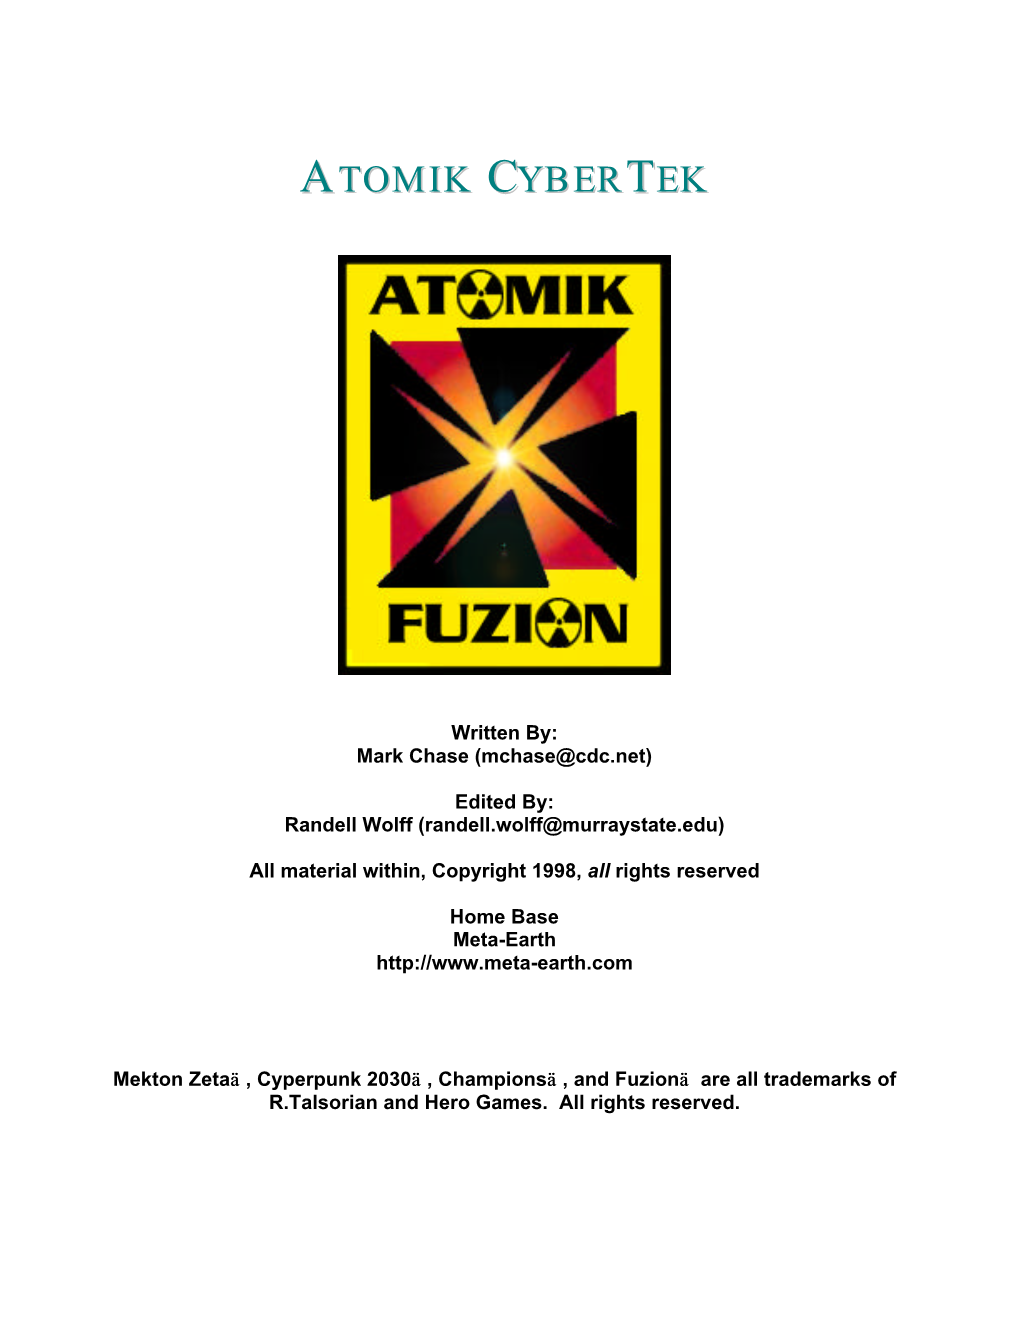 Atomik Cybertek Are, of How Could a Mathematician of the 1920S Course, Cybertech and Biotech